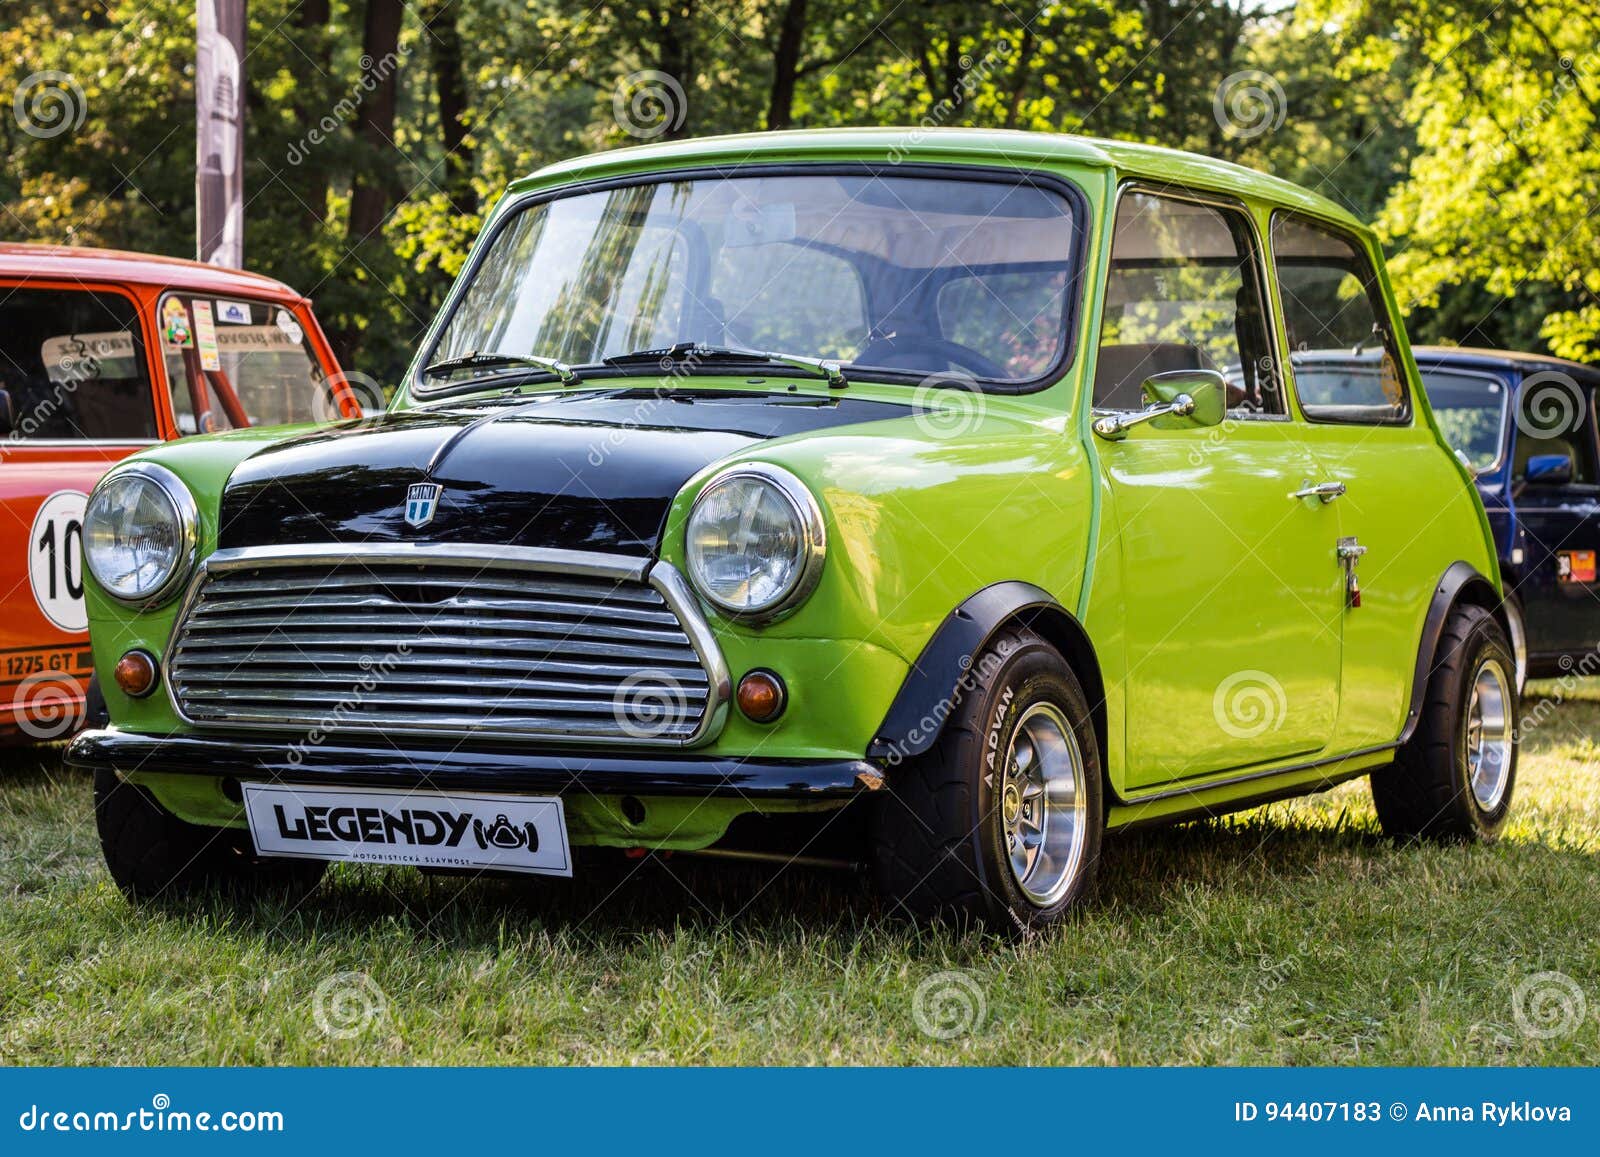 Who Is Mini Cooper Made By - Mini Cooper Cars